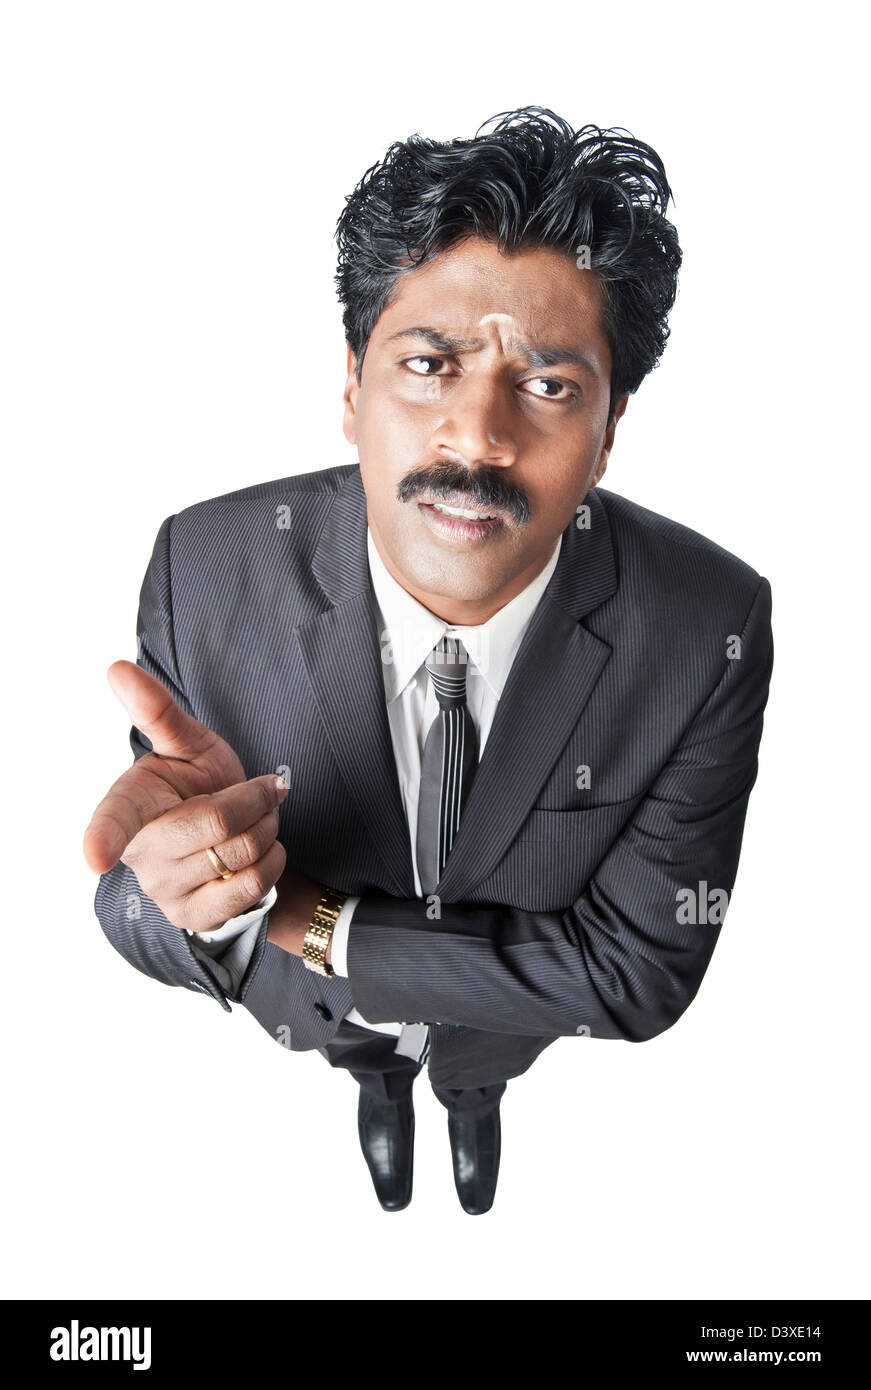 South Indian businessman gesturing and looking serious Stock Photo